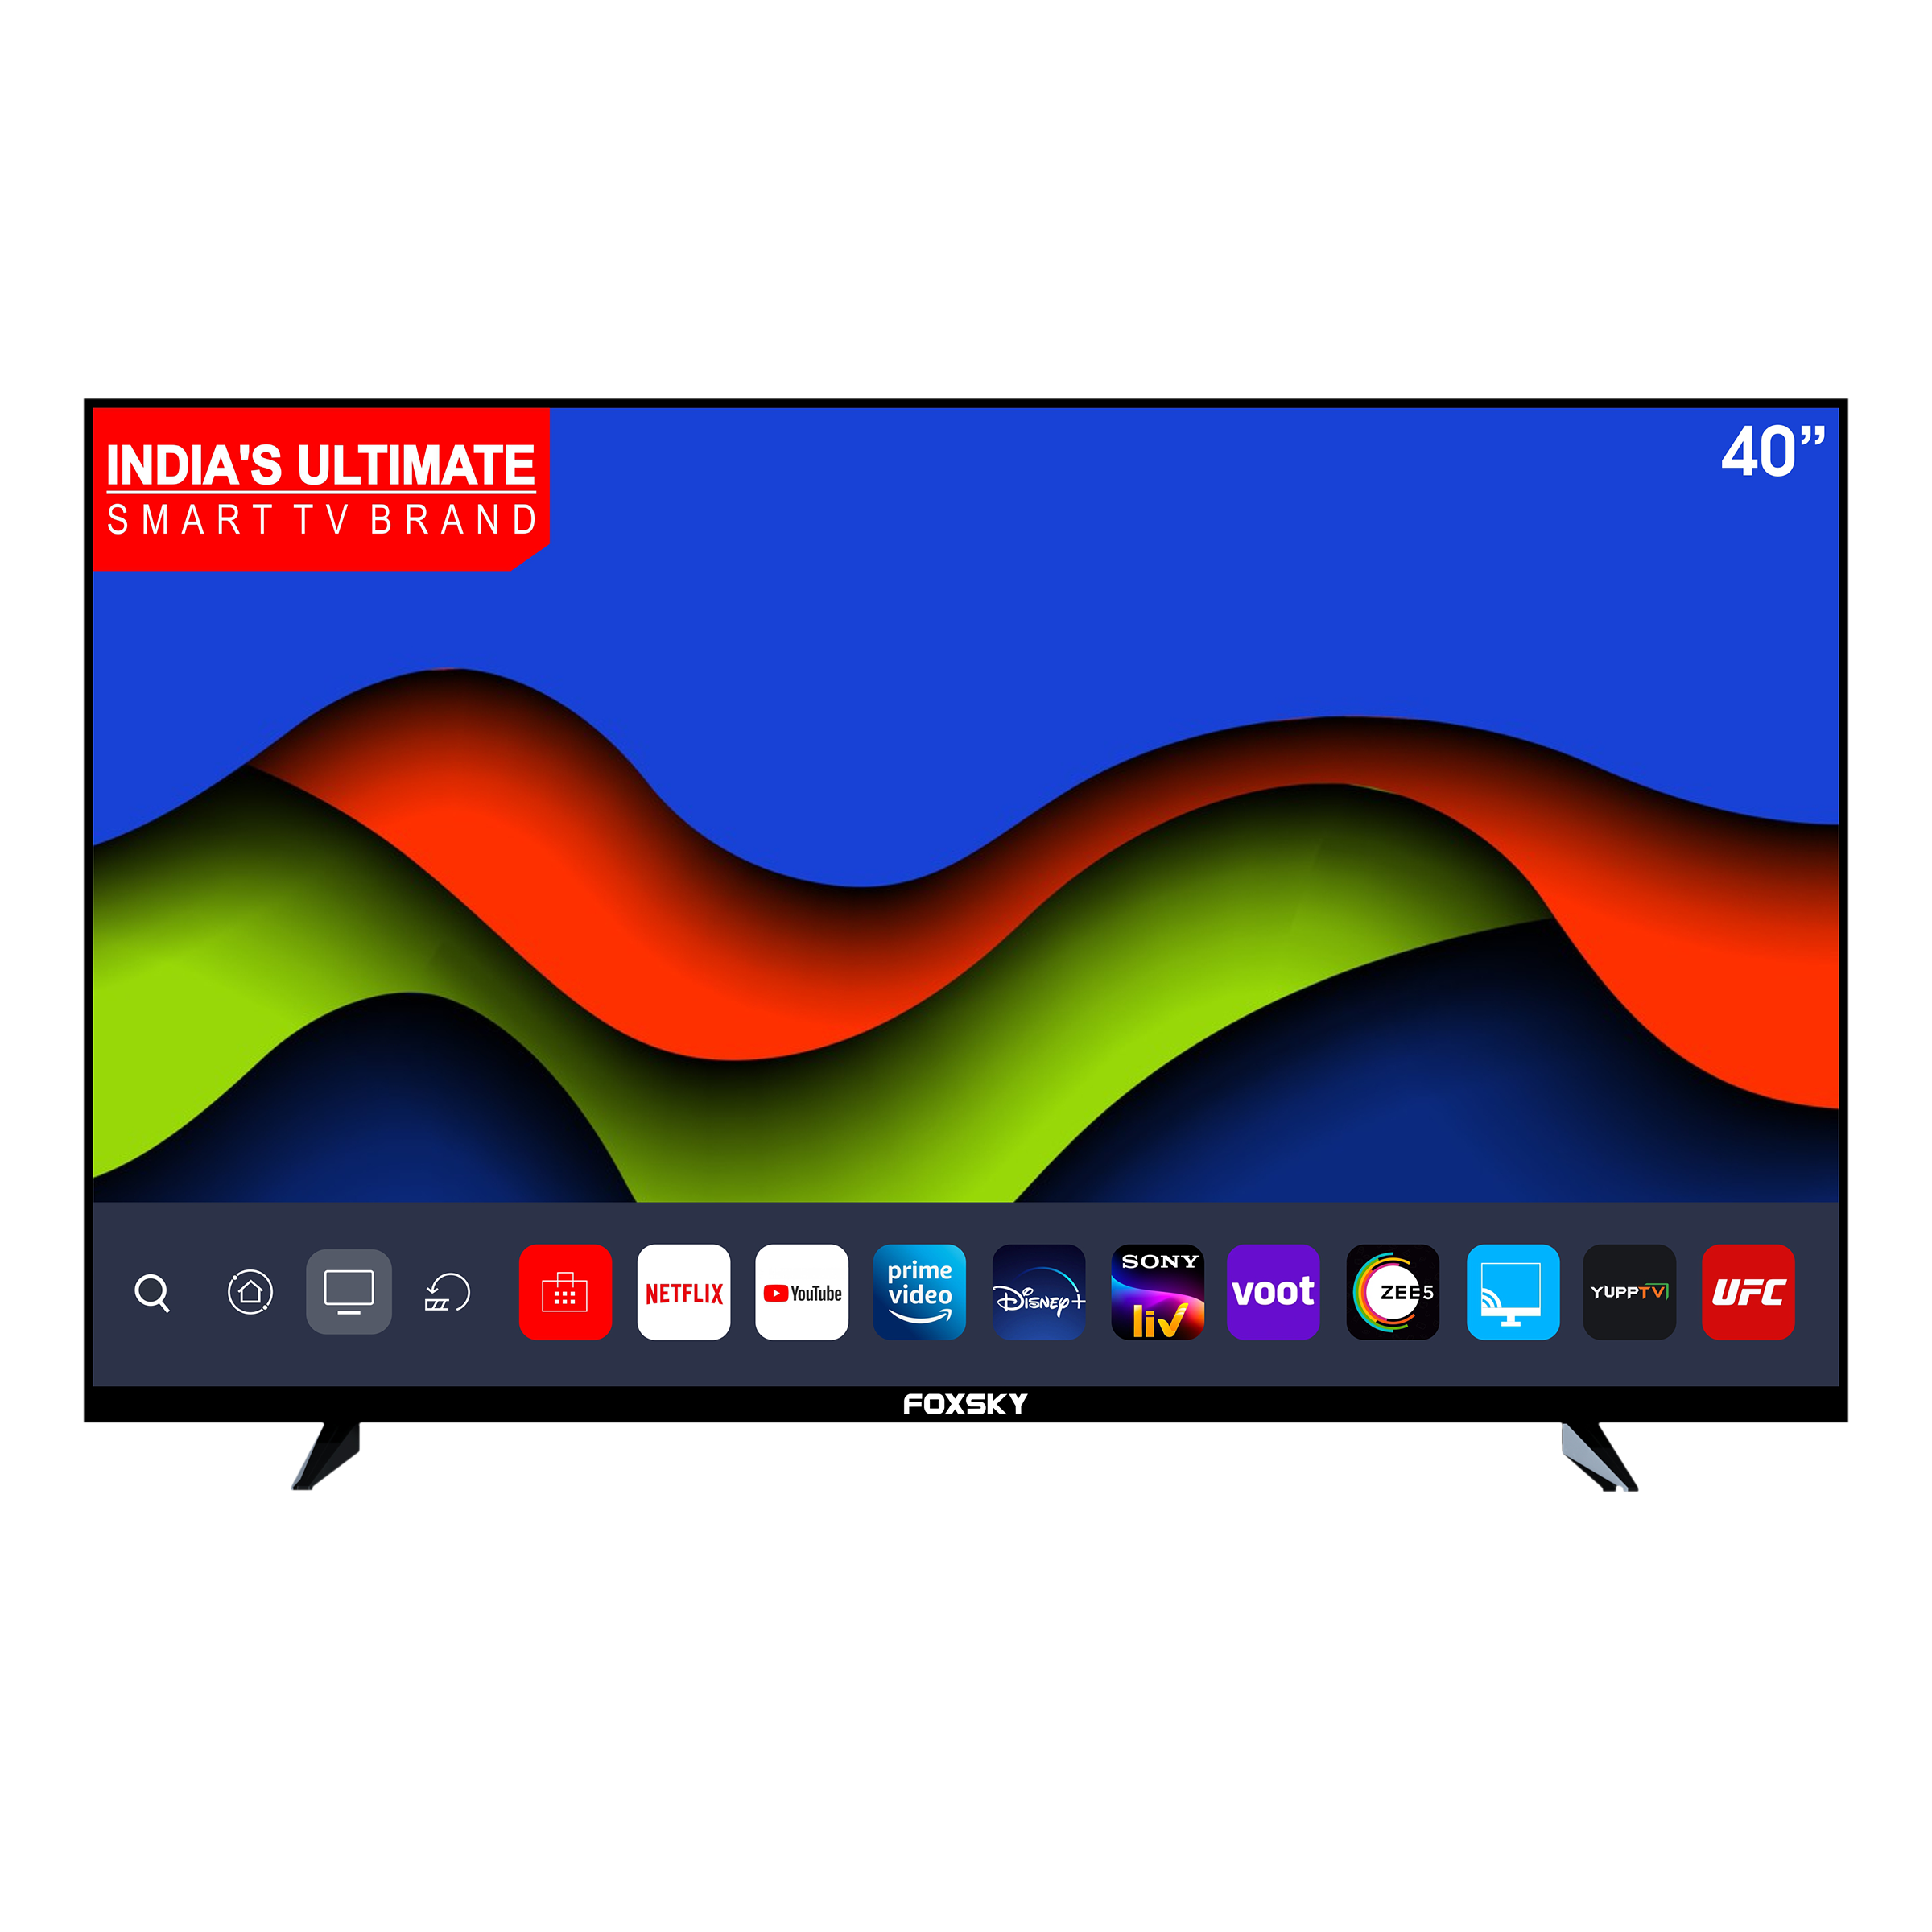 Foxsky FSFHS 101 cm (40 inch) Full HD LED Smart Android TV with Google Assistance (2022 model)_1